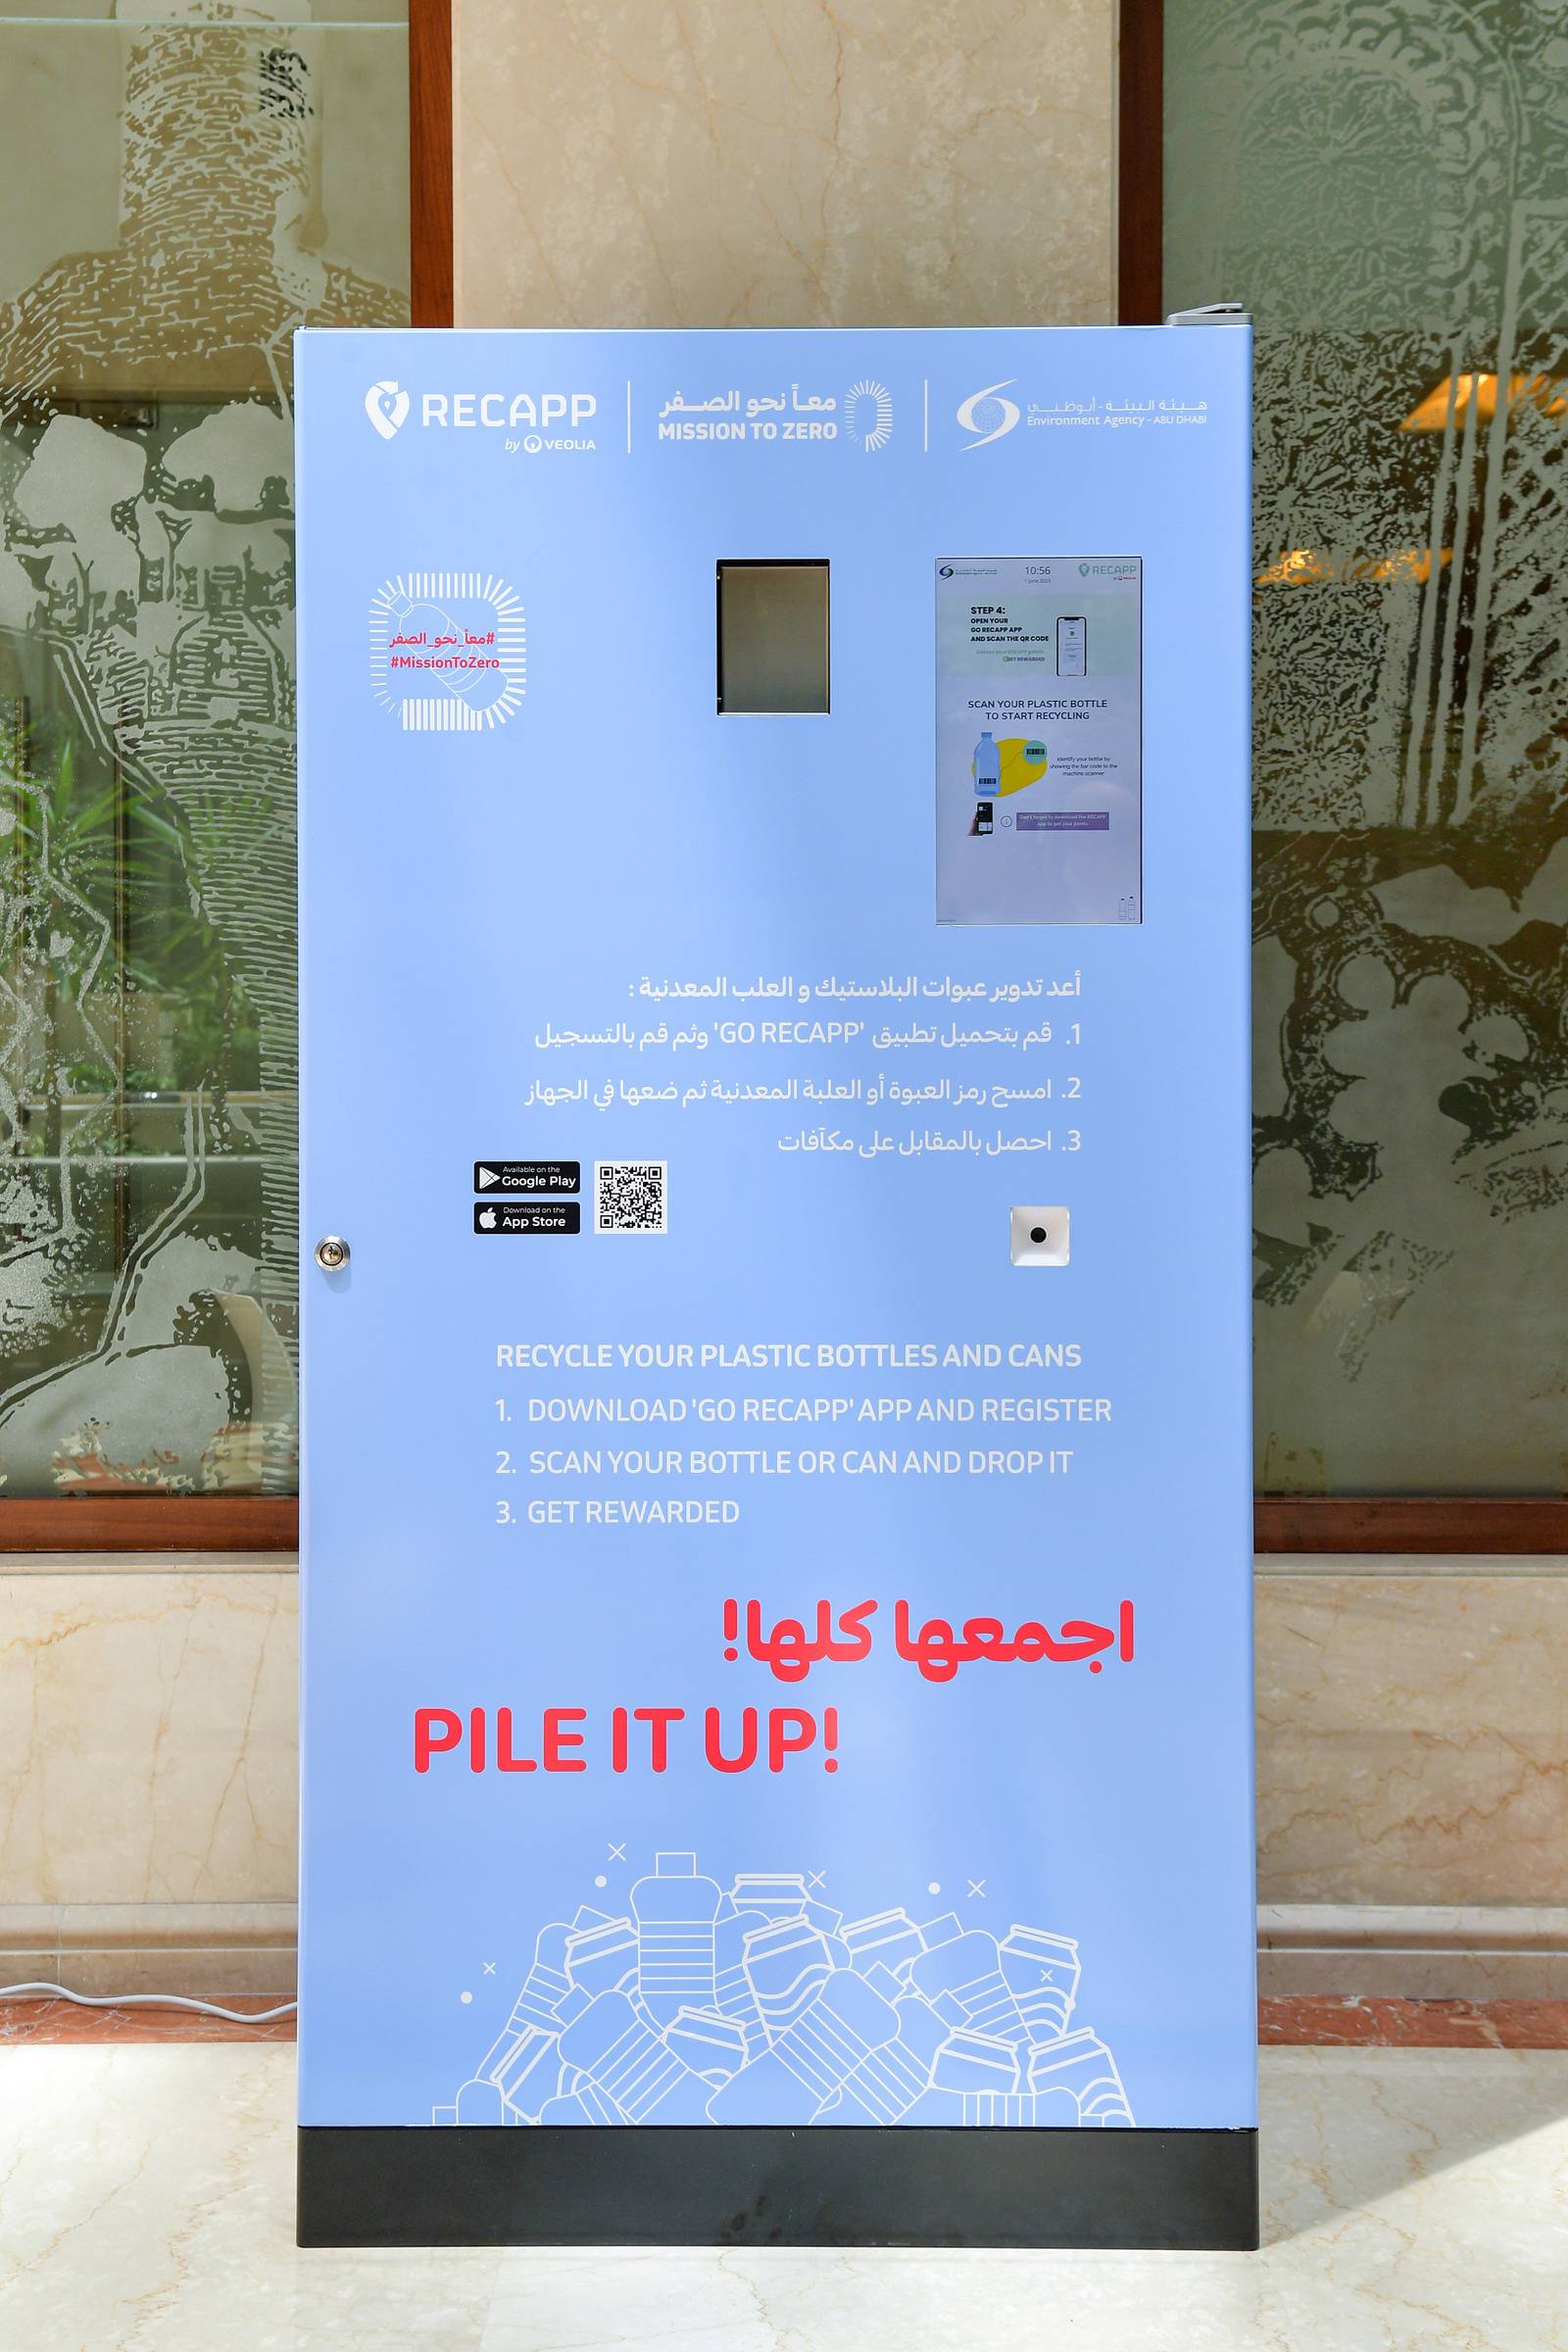 Abu Dhabi introduces new recycling bins to help reduce plastic pollution